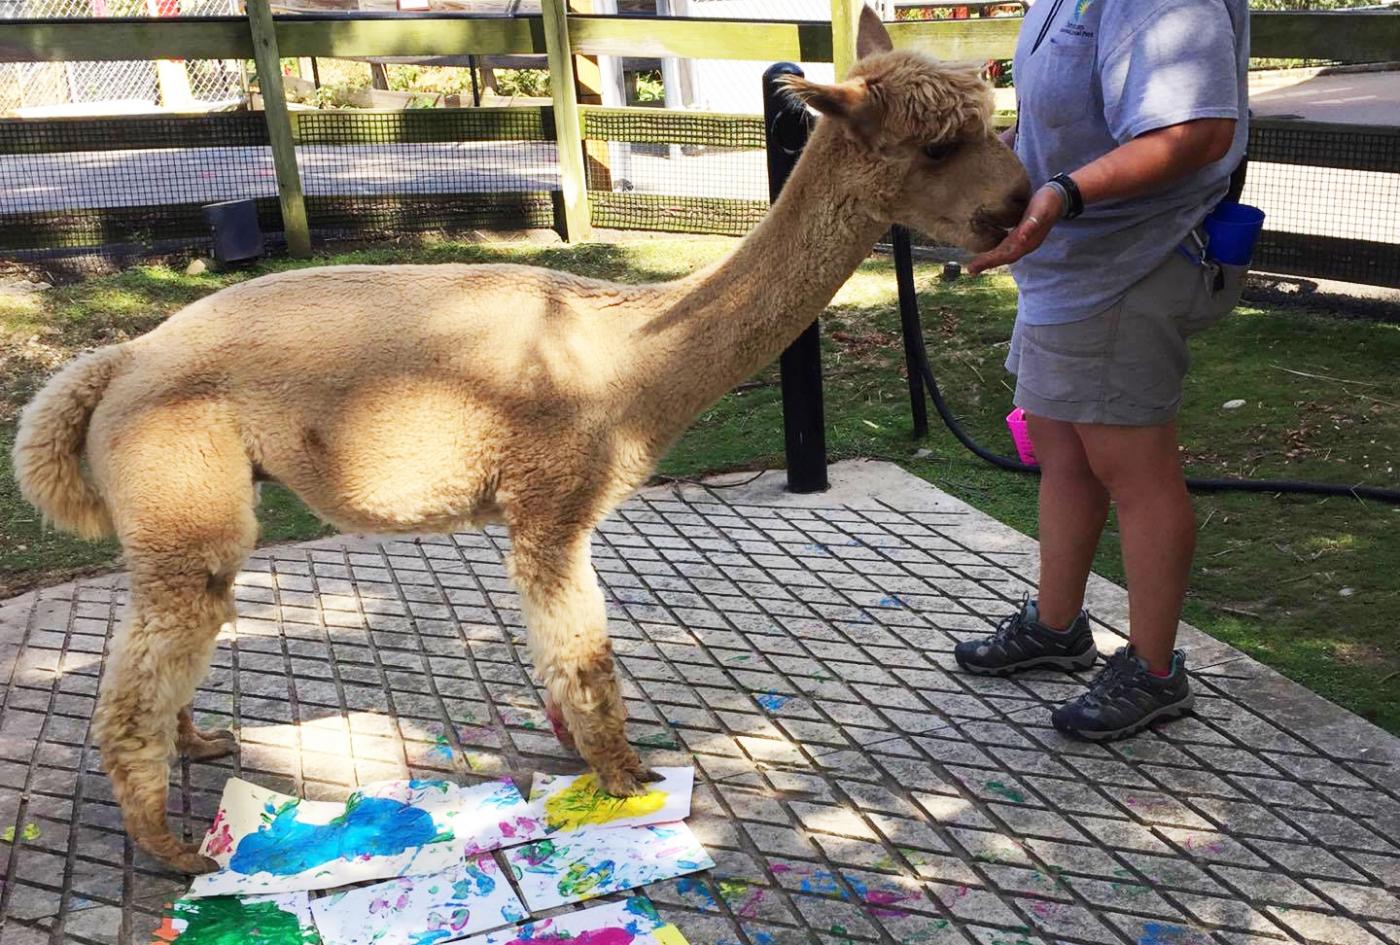 Animal keeper Nikki Maticic paints with alpaca Orion for enrichment. 